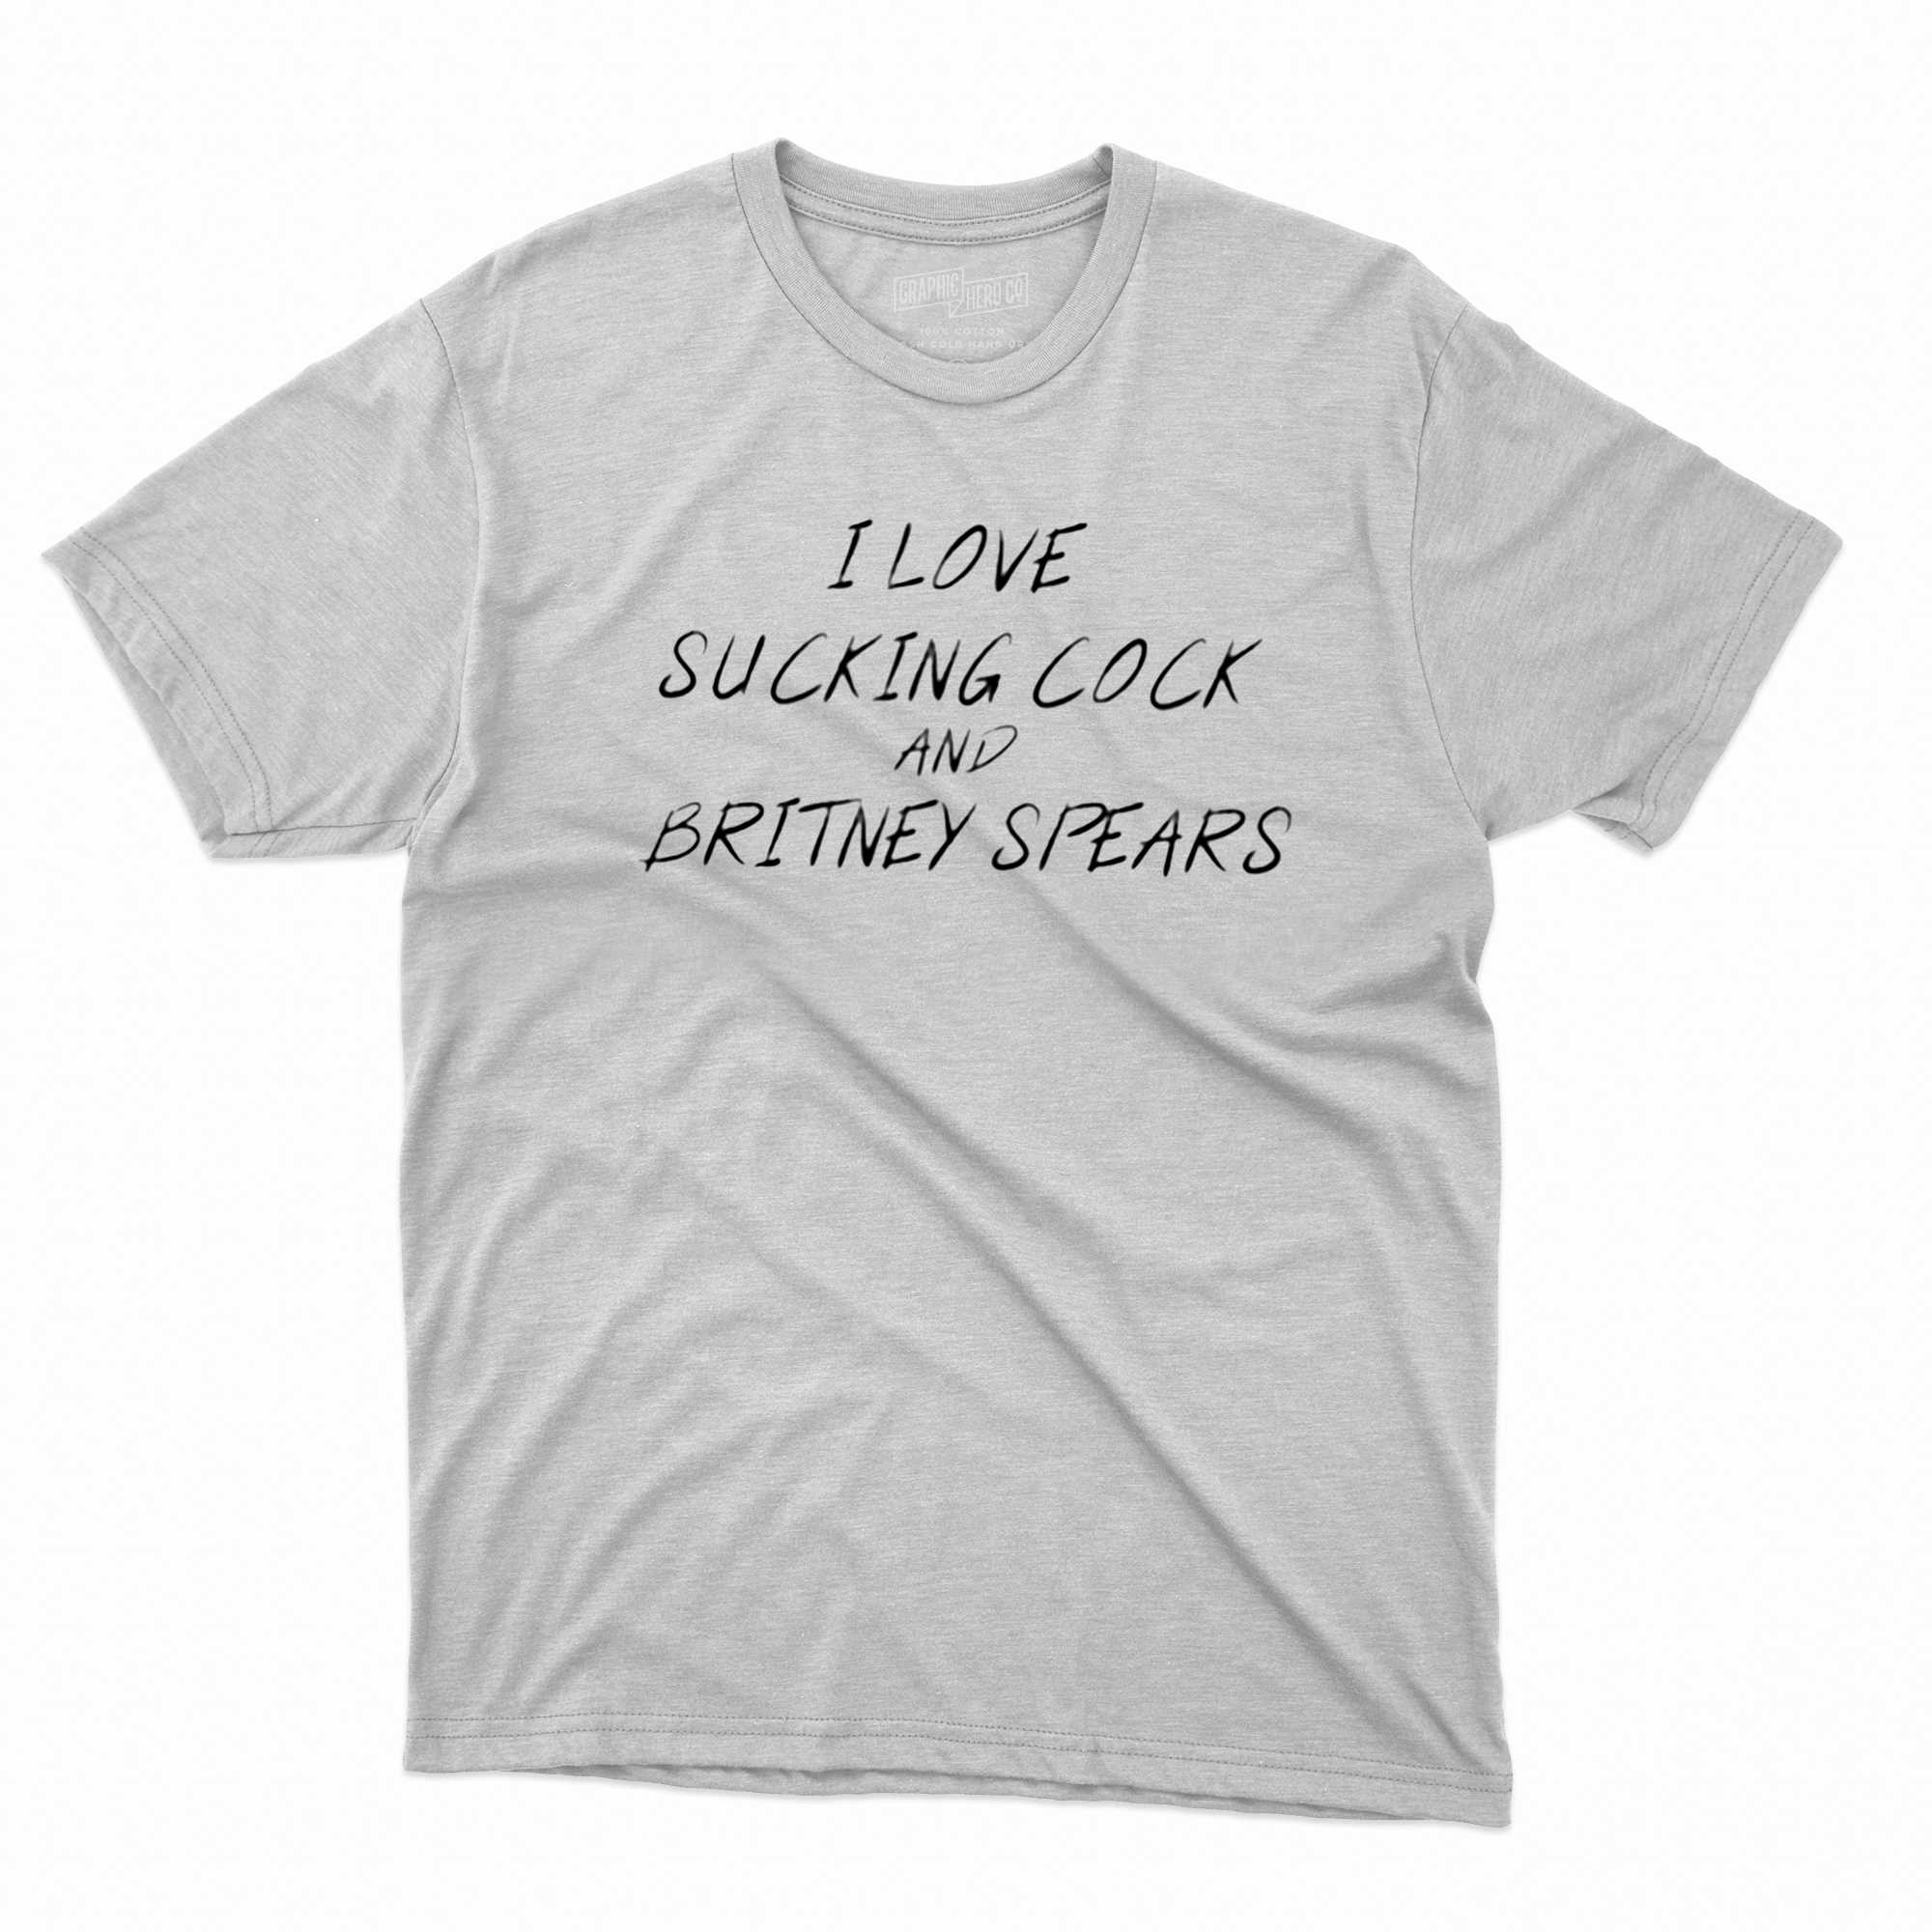 I Love Sucking Cock And Britney Spears Shirt Shibtee Clothing